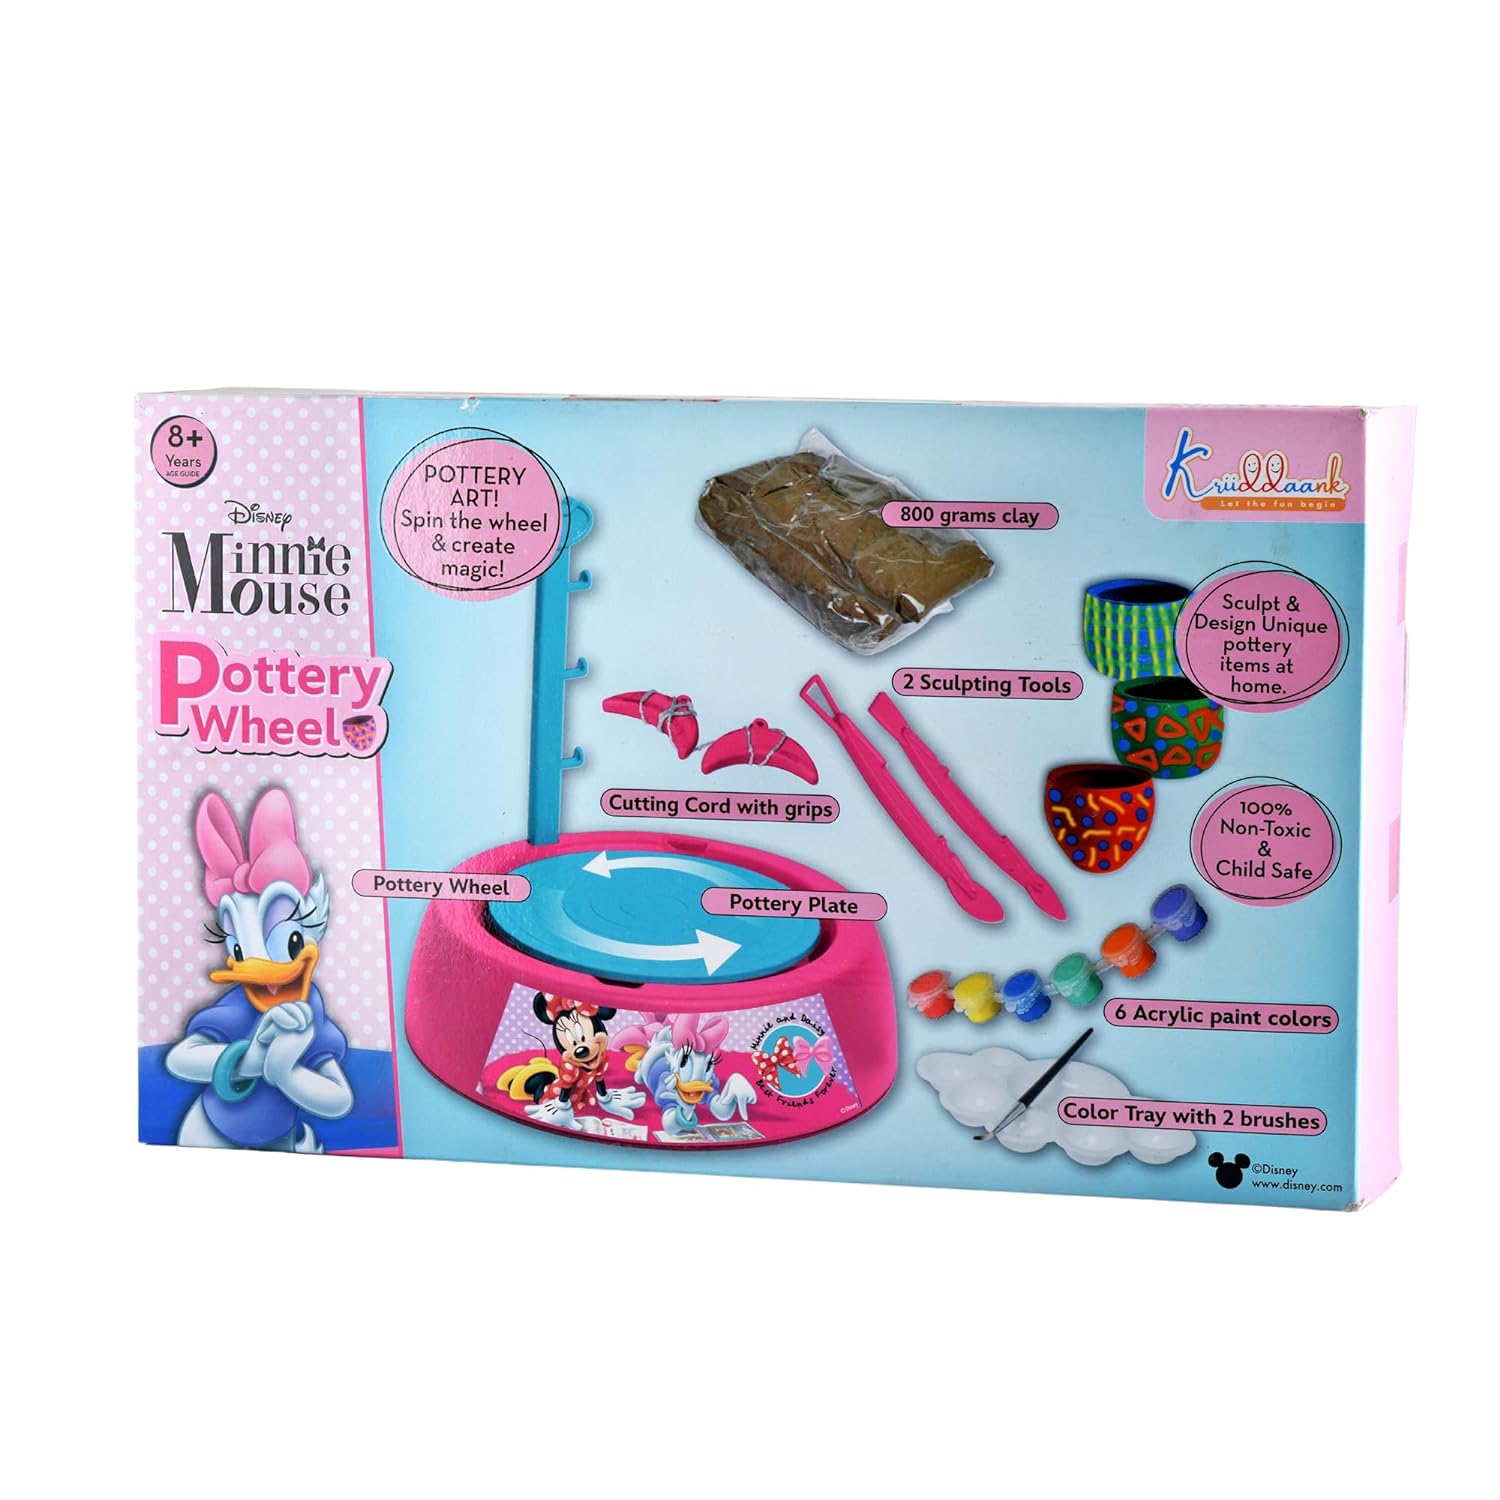 Disney Minnie Mouse Pottery Wheel Battery Operated with Molding Clay & Painting Kit Learning and Education Multicolor Board Game Toys for Kids (Pink)